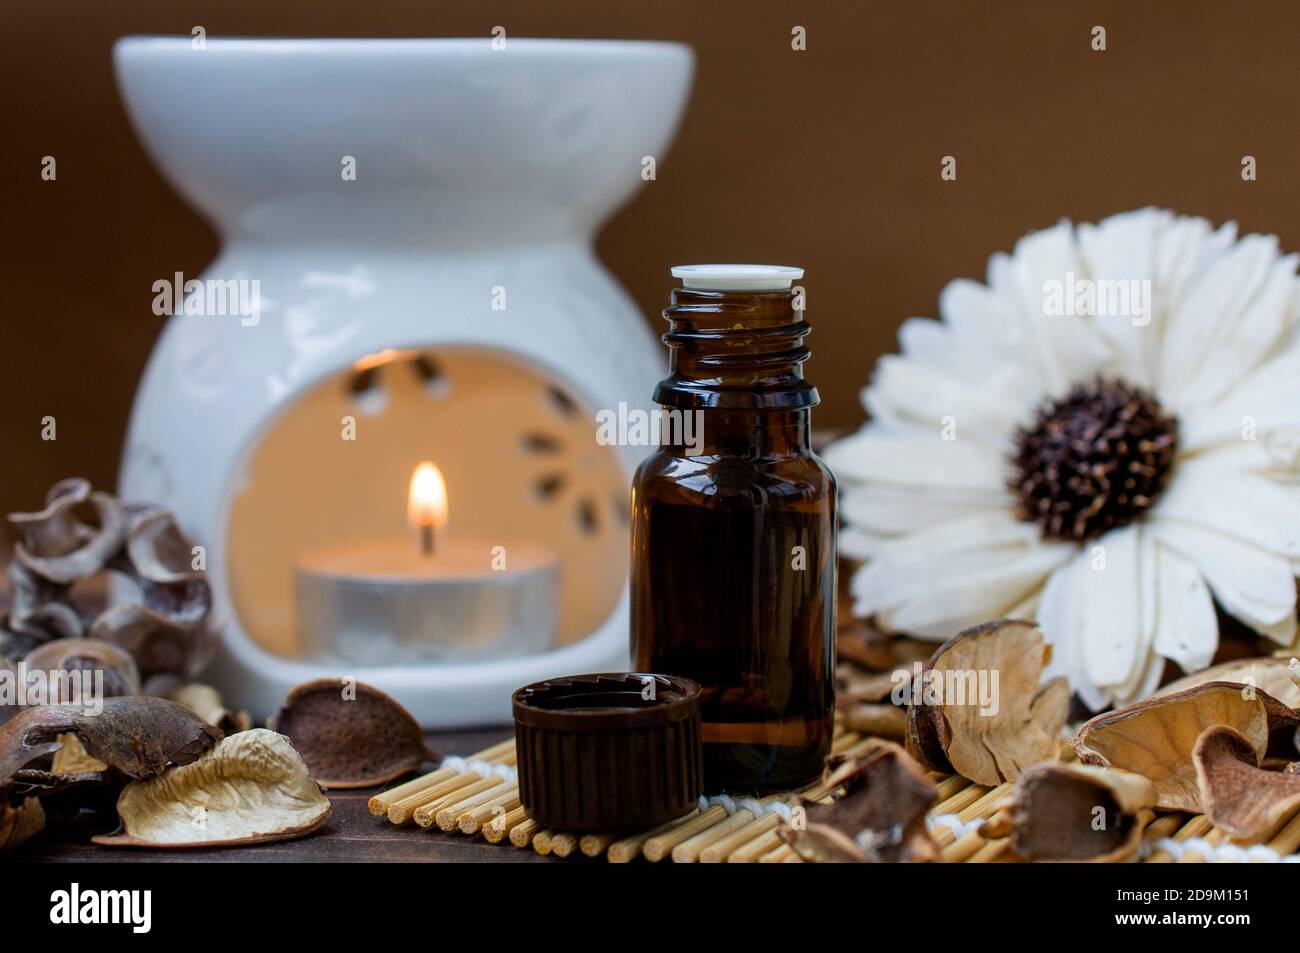 Aroma lamp with a burning candle, a bottle of aromatic oil, in brown tones, decorated with a flower. Relaxation and spa atmosphere. Aromatherapy Stock Photo